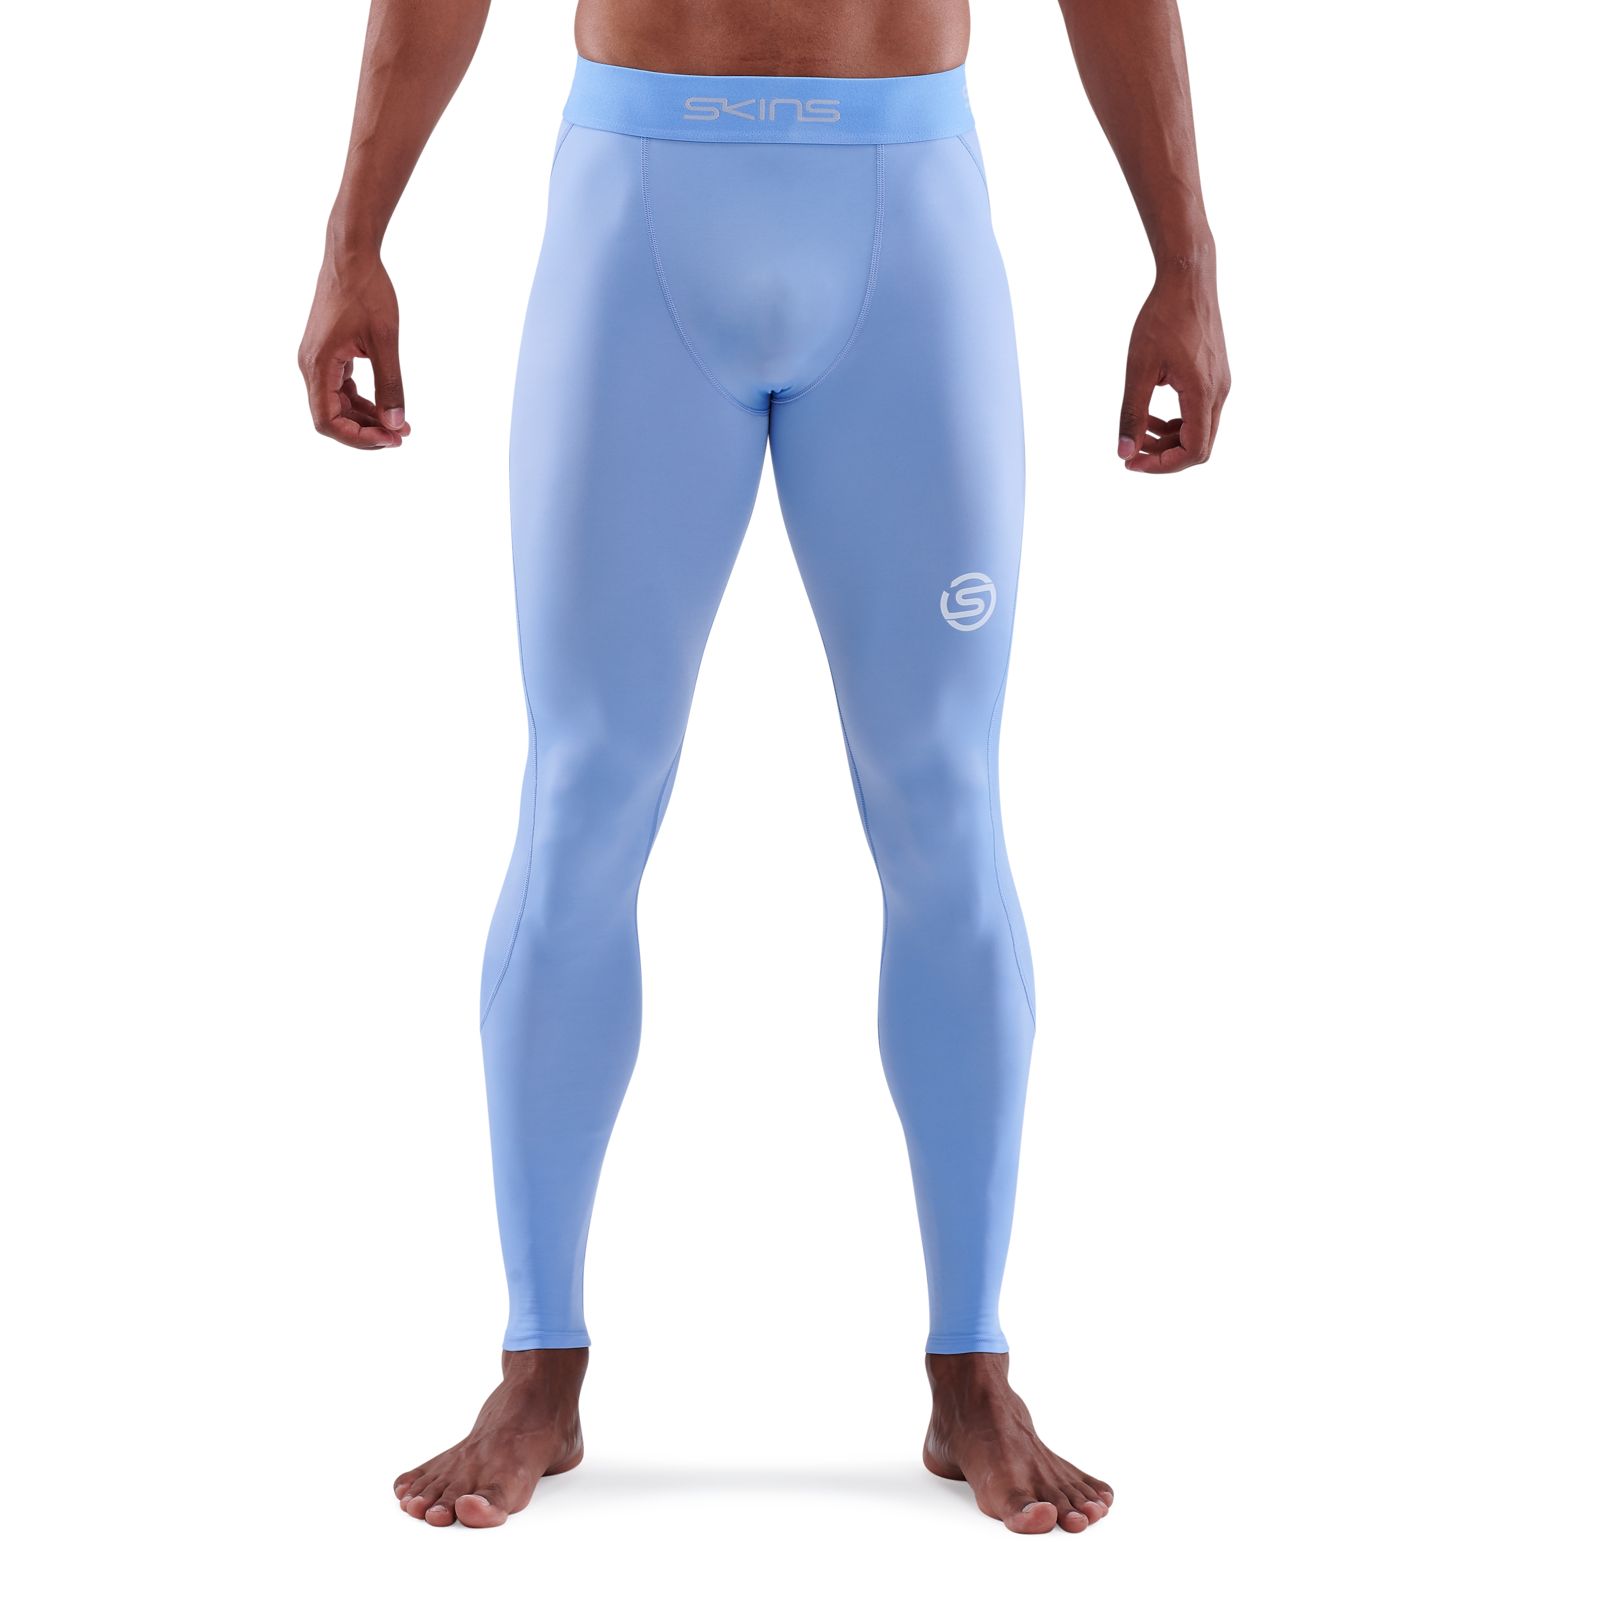 Nylon Compression Pant and Full Tights For Men (Sky Blue) – ReDesign Sports